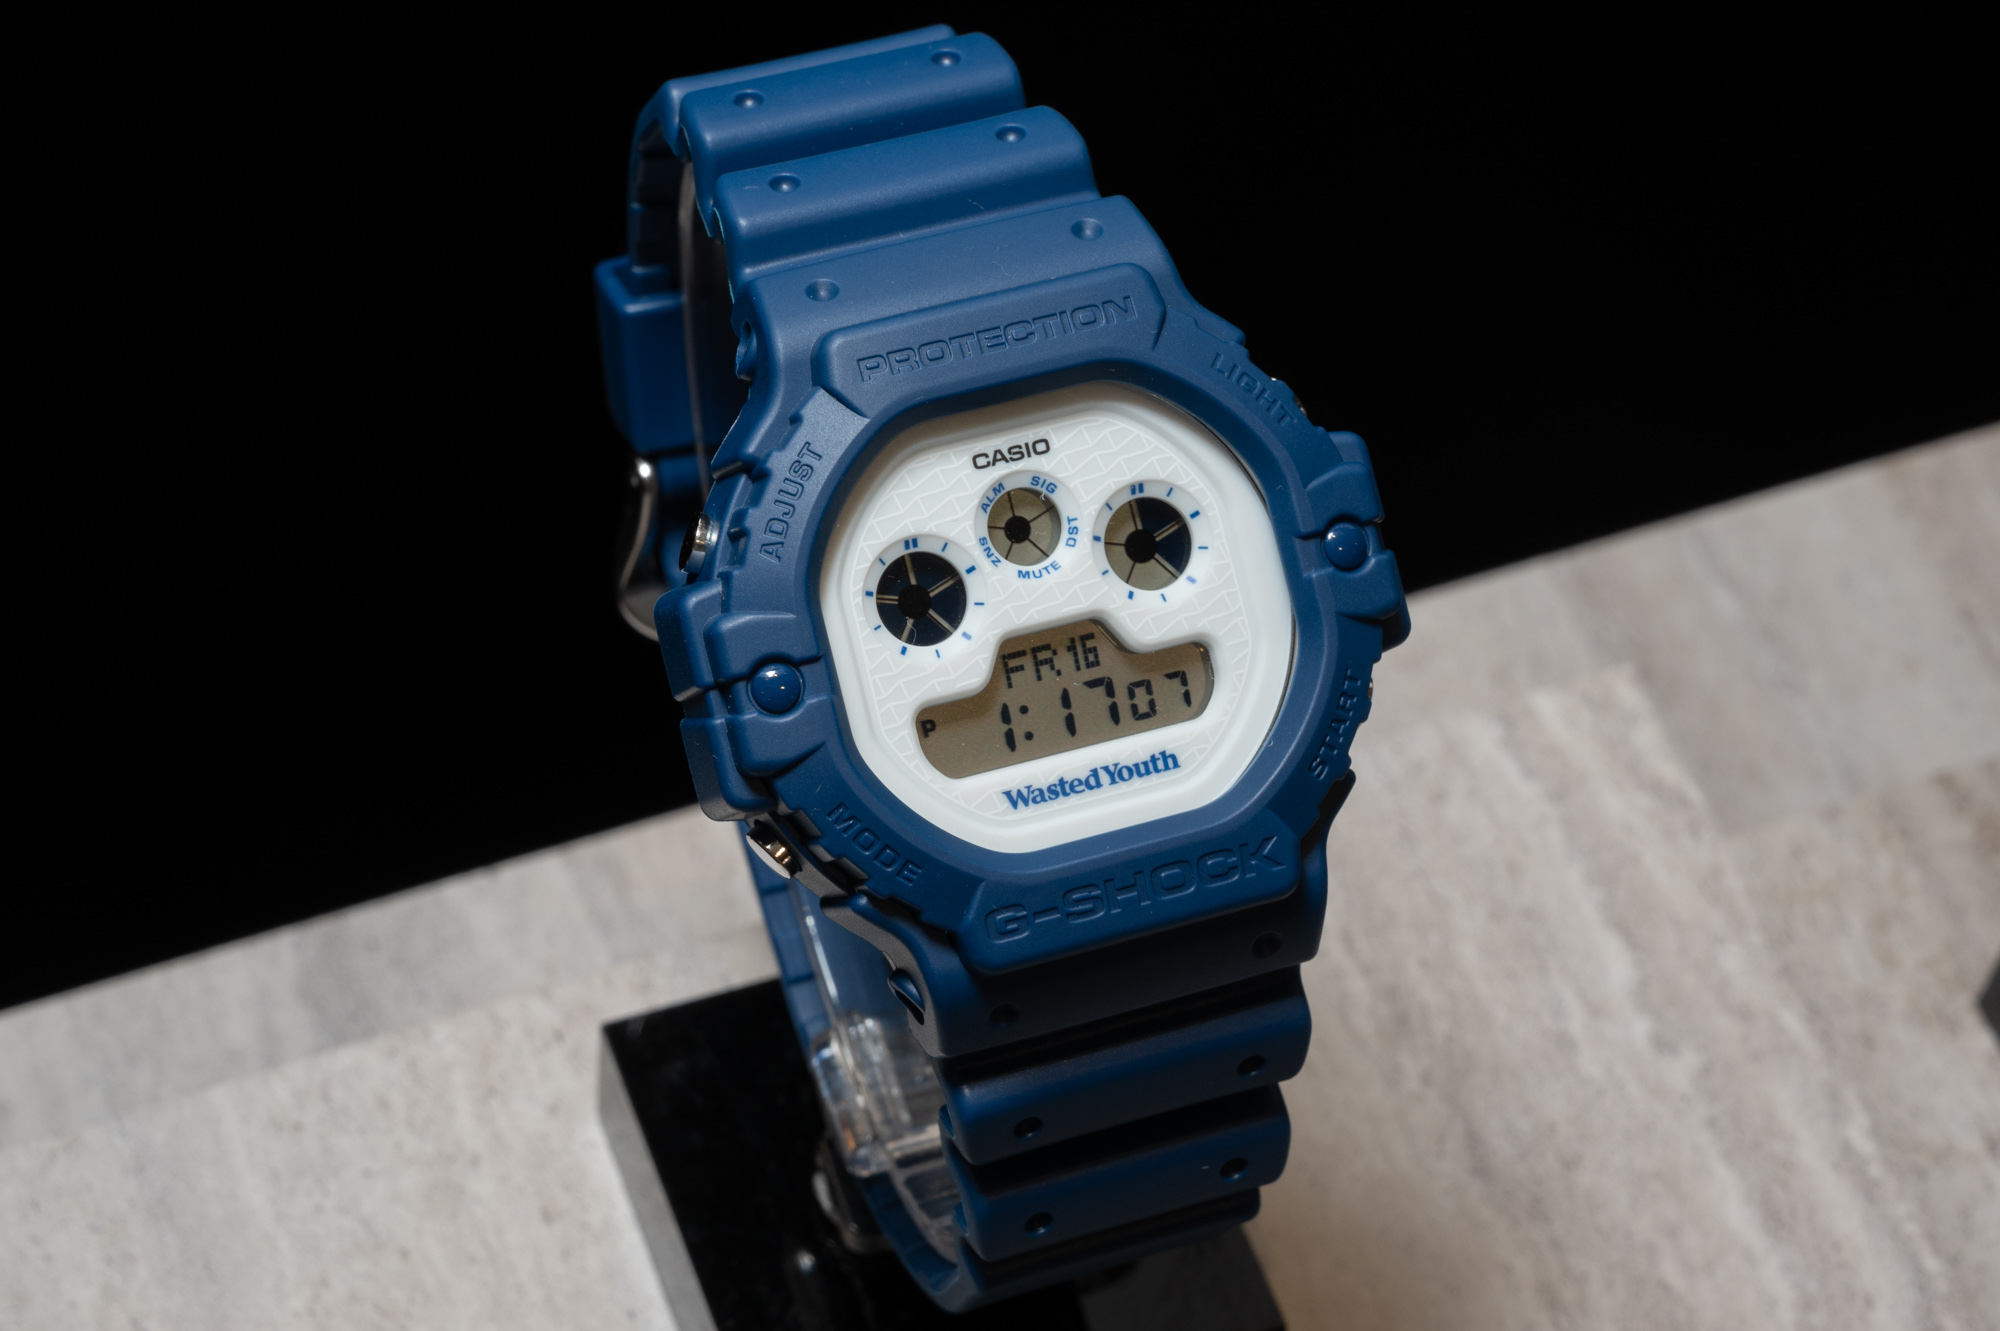 Wasted Youth × G-SHOCK DW-5900WY腕時計(デジタル)